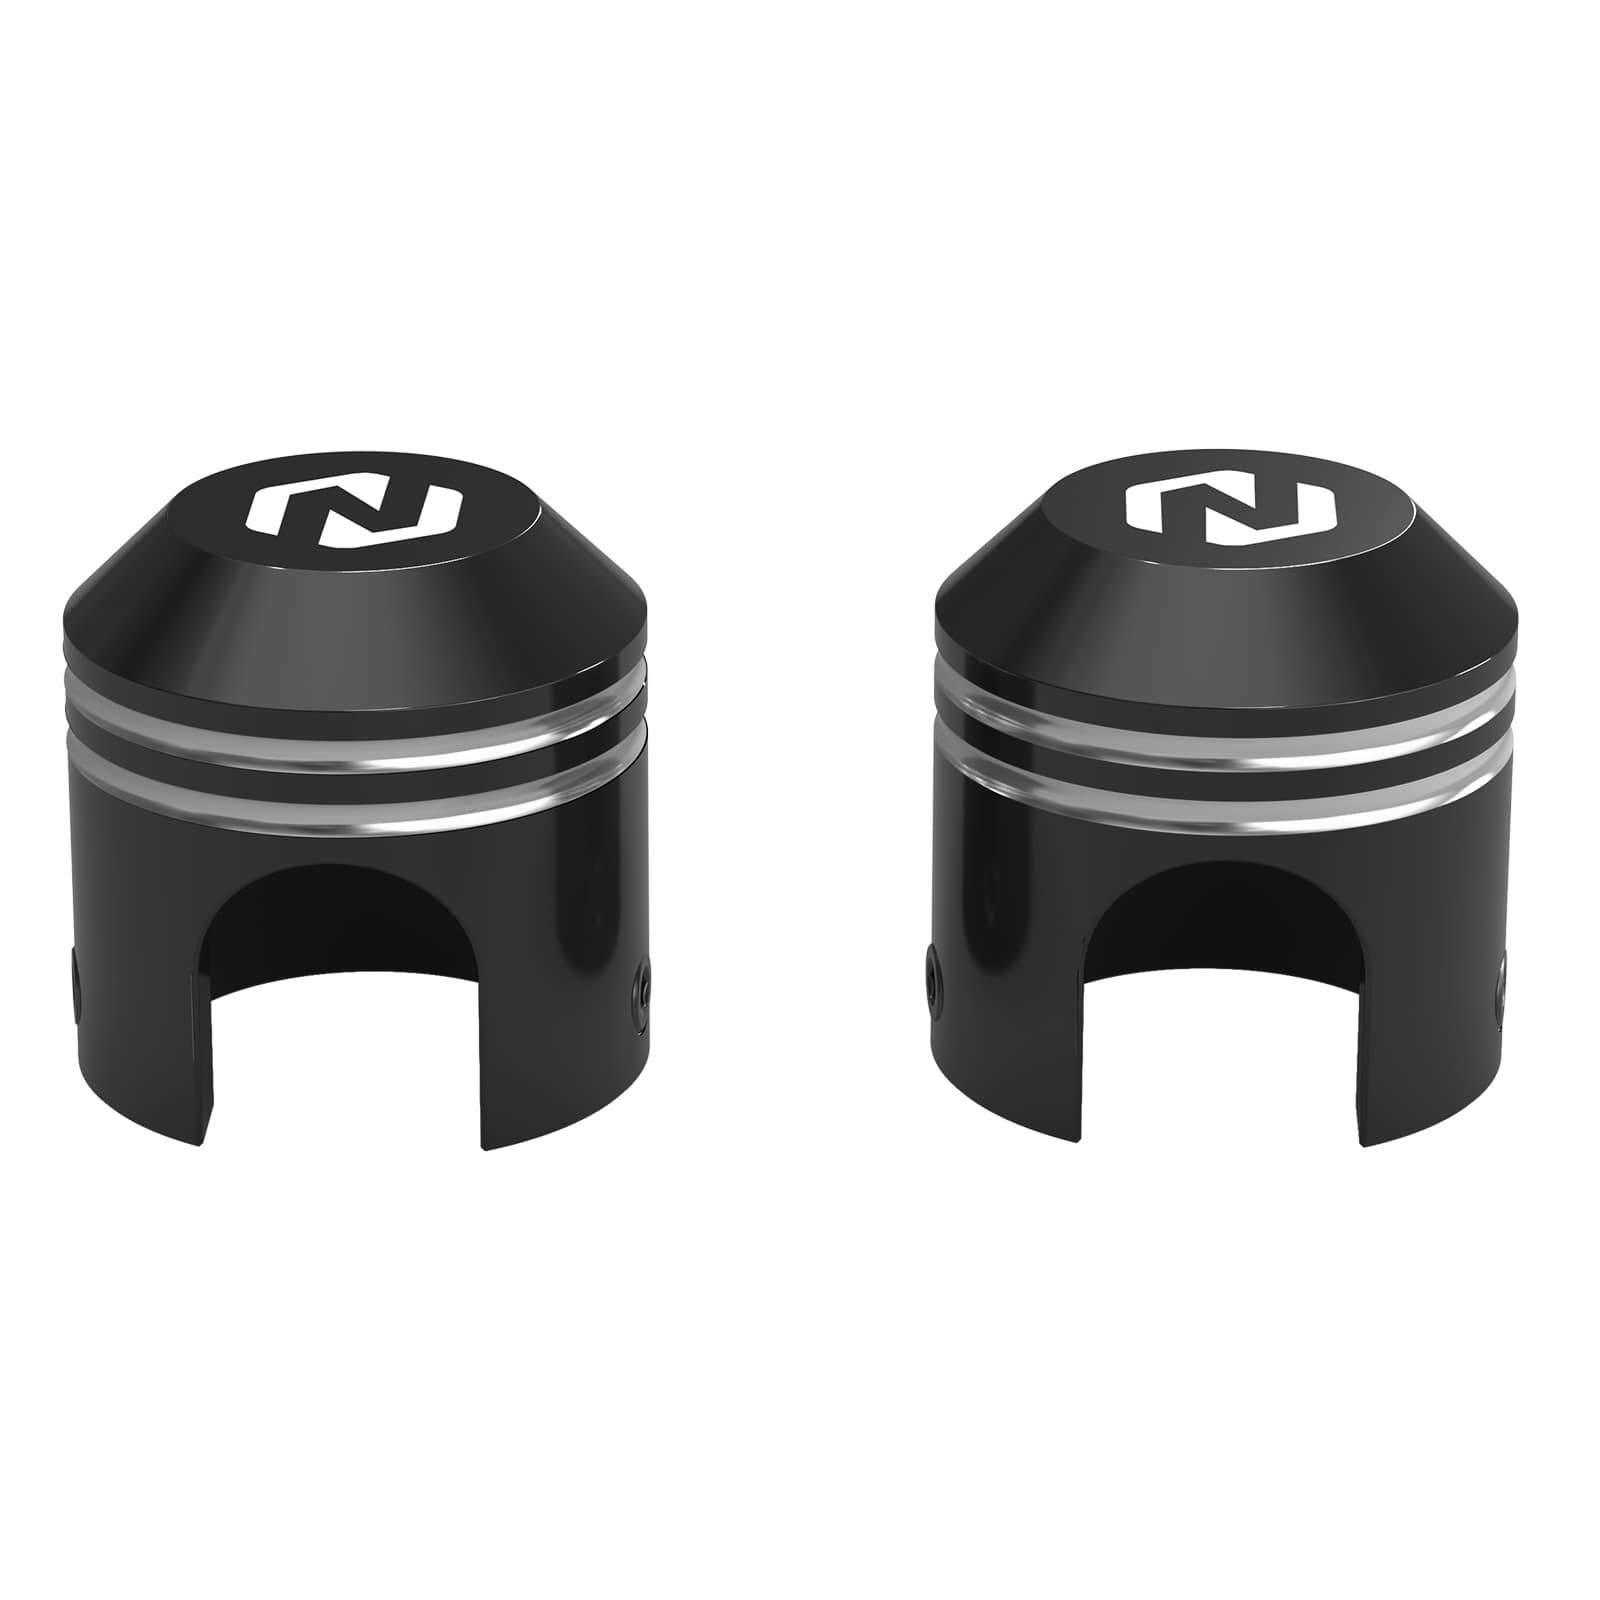 Brake and Clutch Cables Ferrule Covers For Harley Davidson